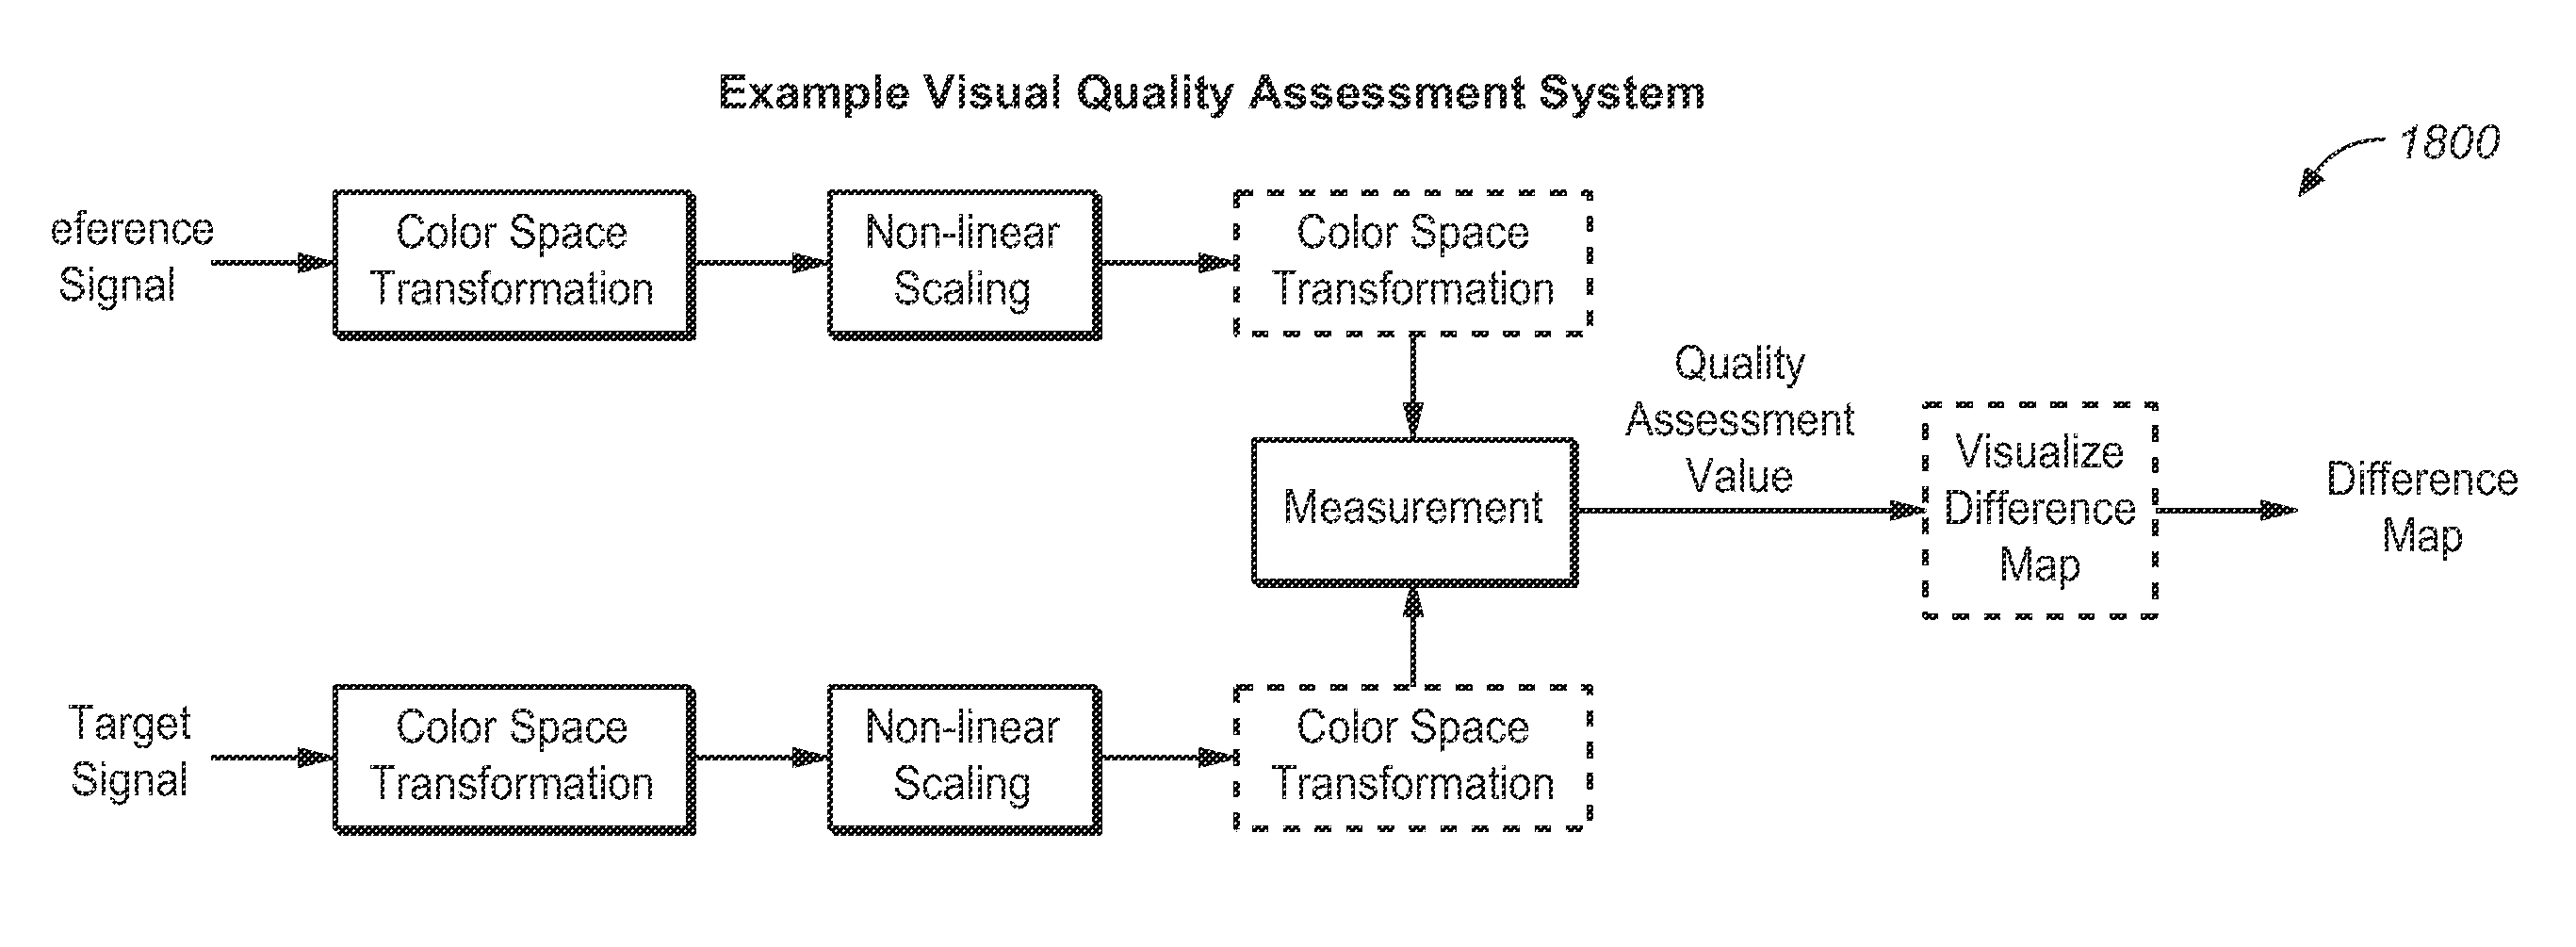 Quality assessment for images that have extended dynamic ranges or wide color gamuts